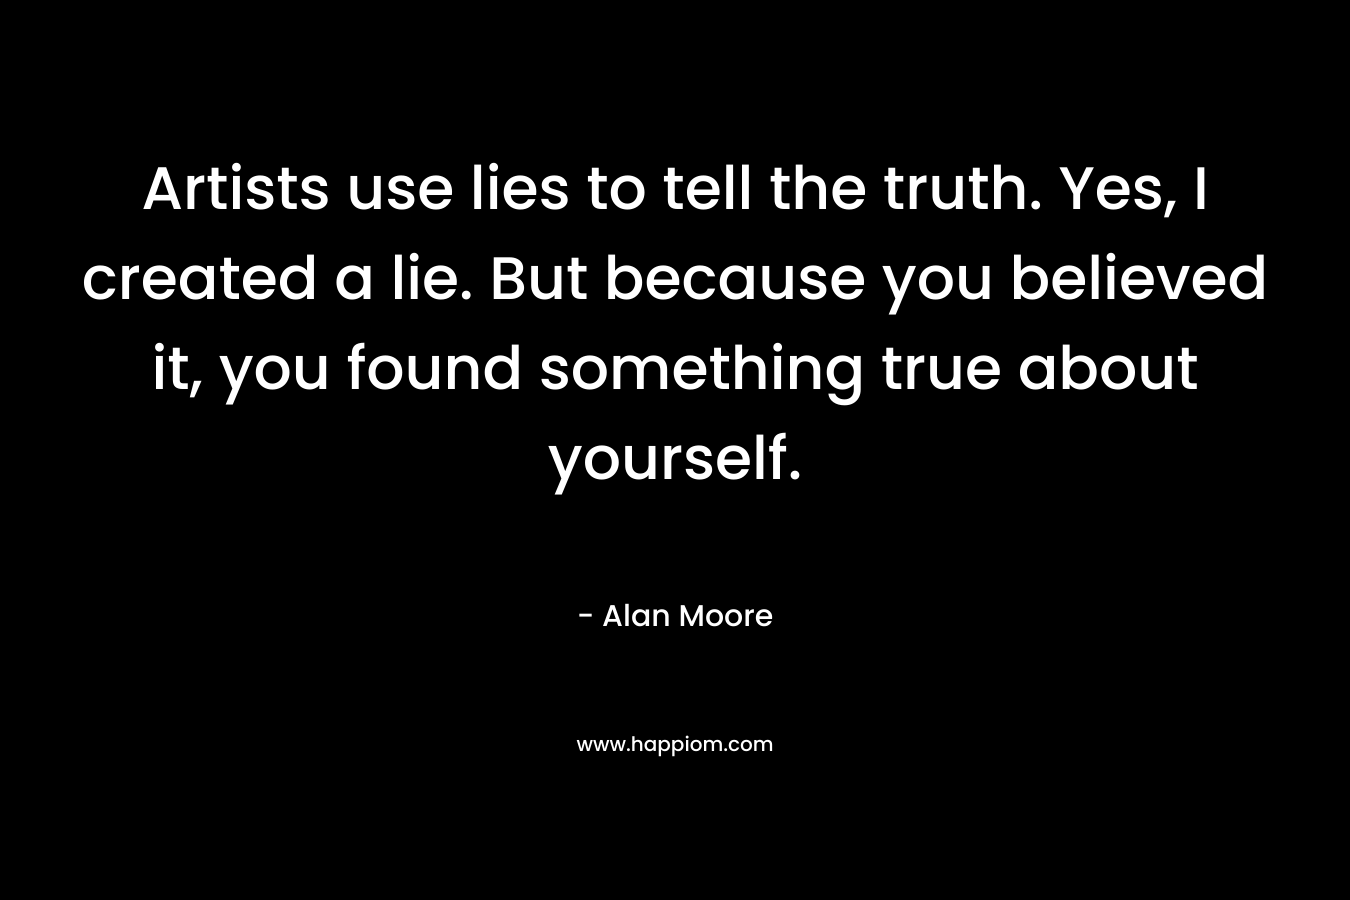 Artists use lies to tell the truth. Yes, I created a lie. But because you believed it, you found something true about yourself.